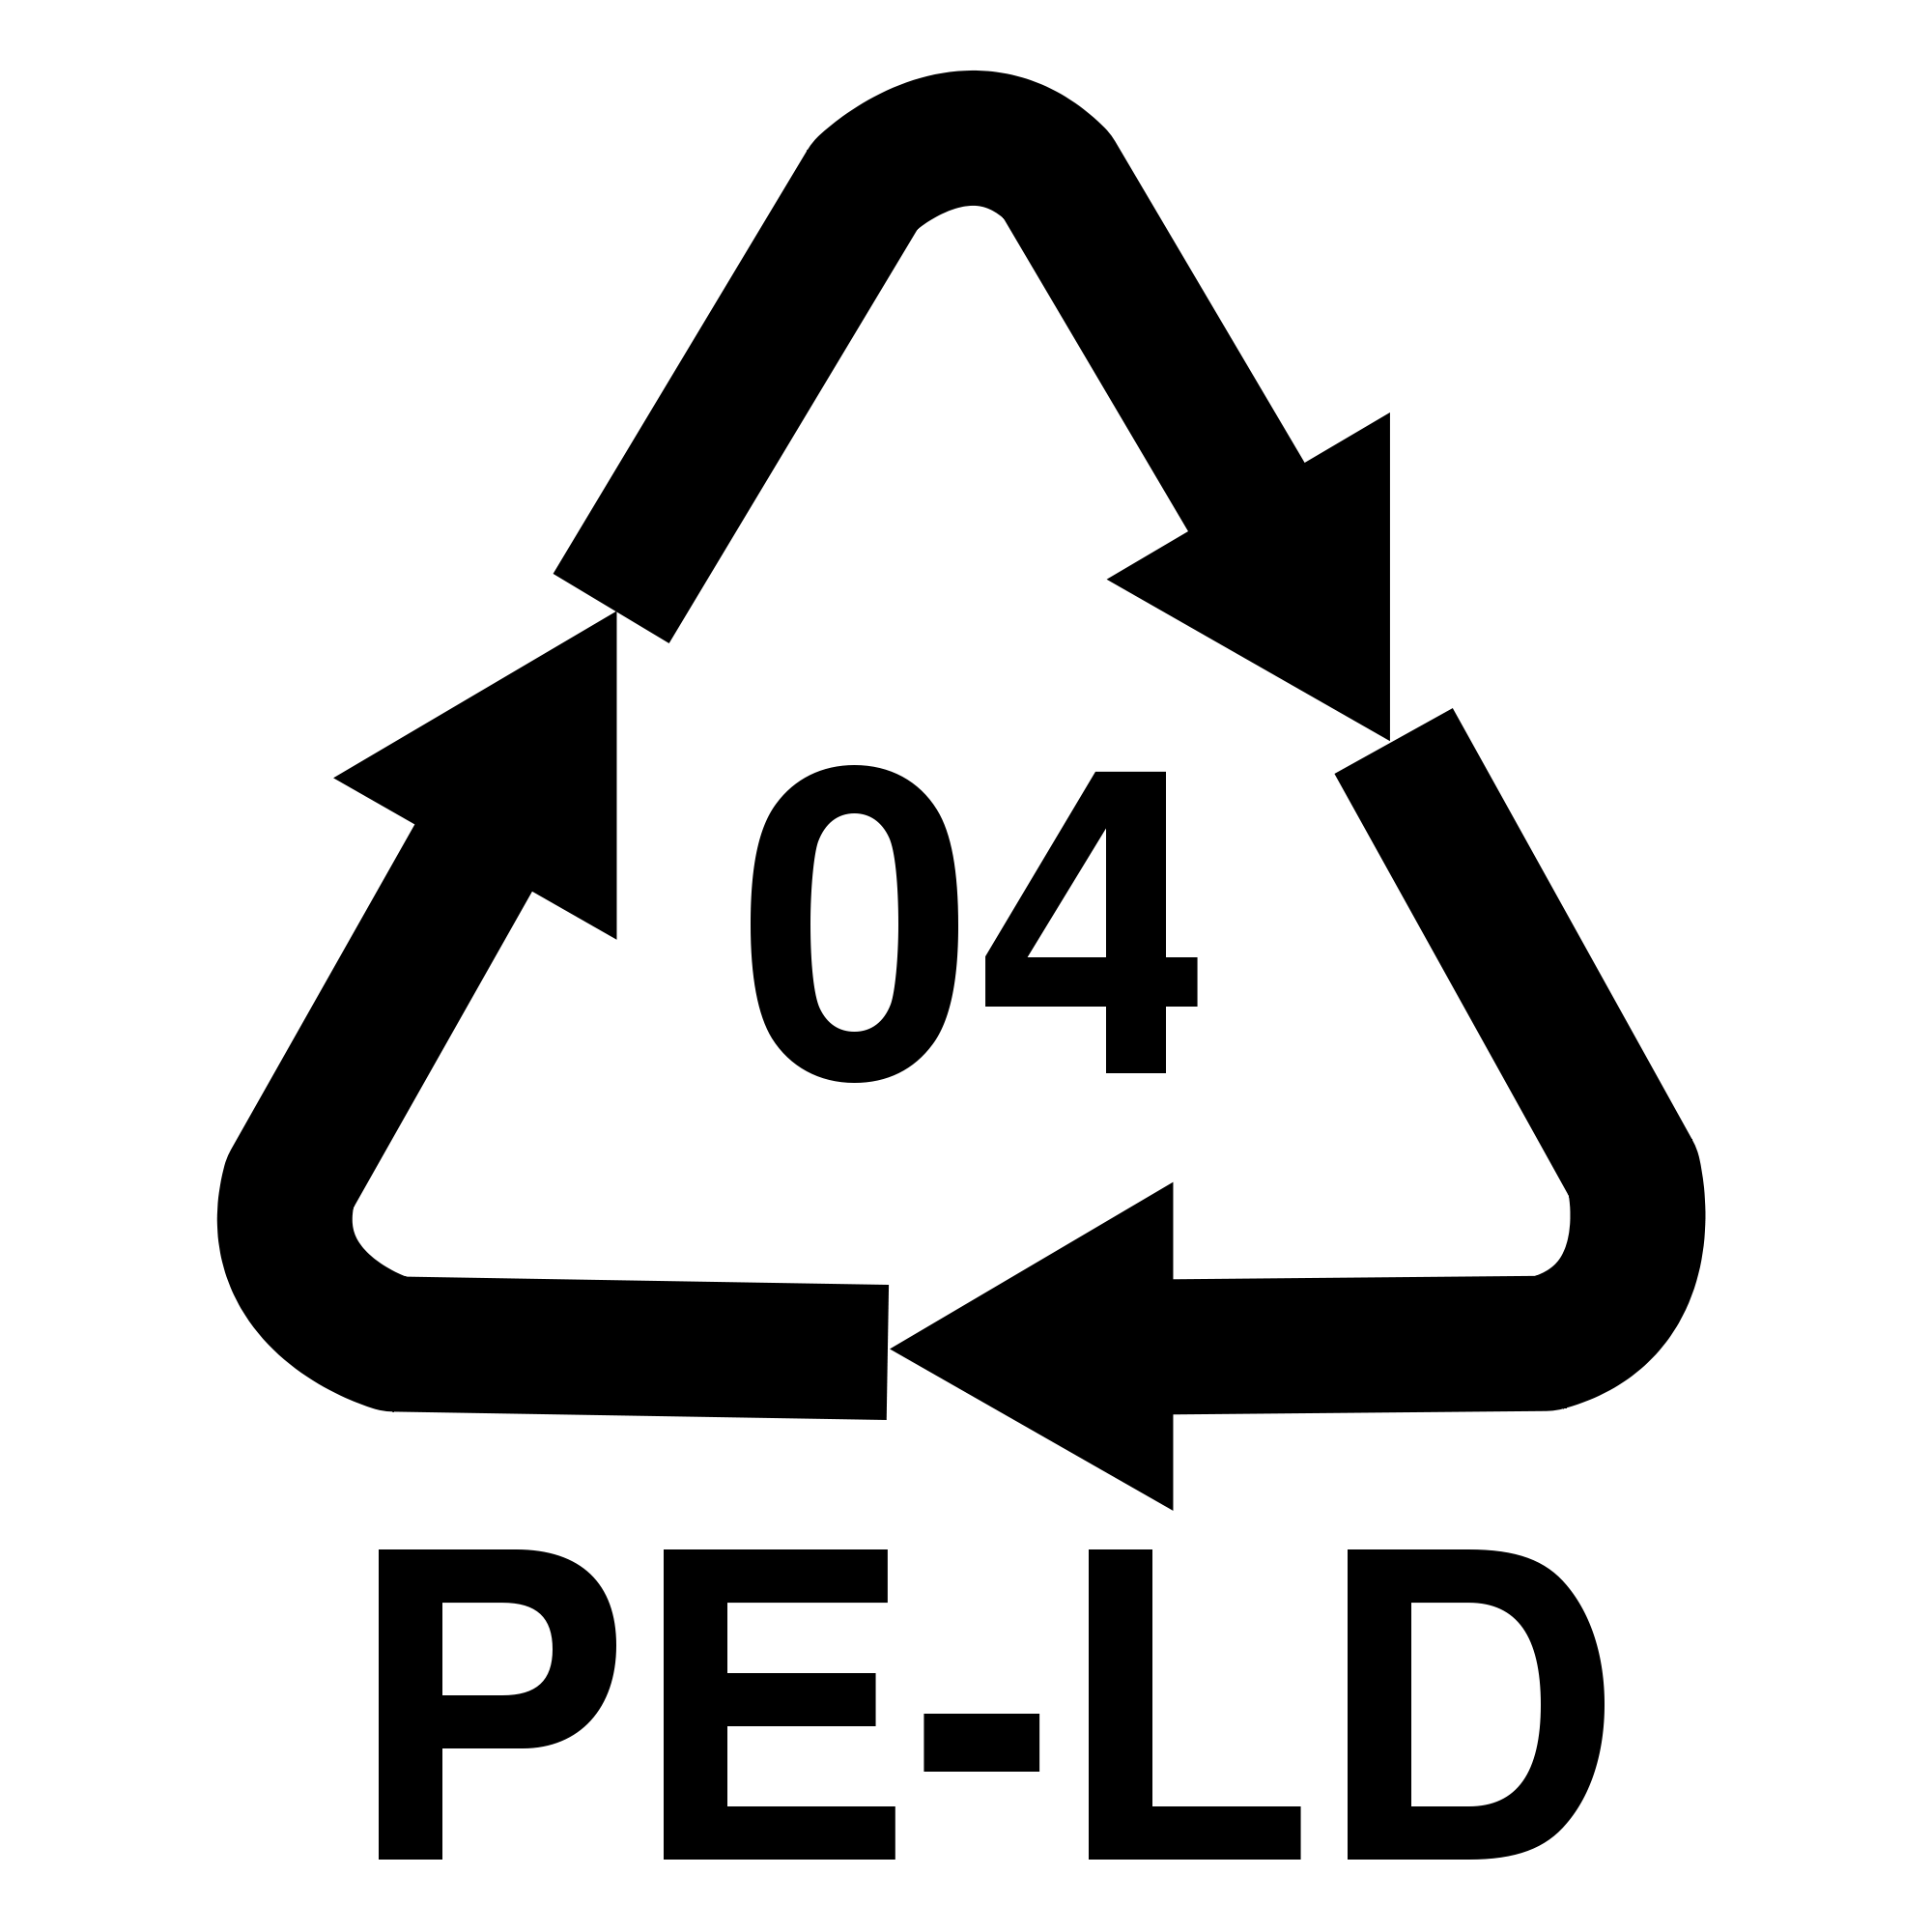 Black and White Recycle Logo - File:Plastic-recyc-04.svg - Wikimedia Commons